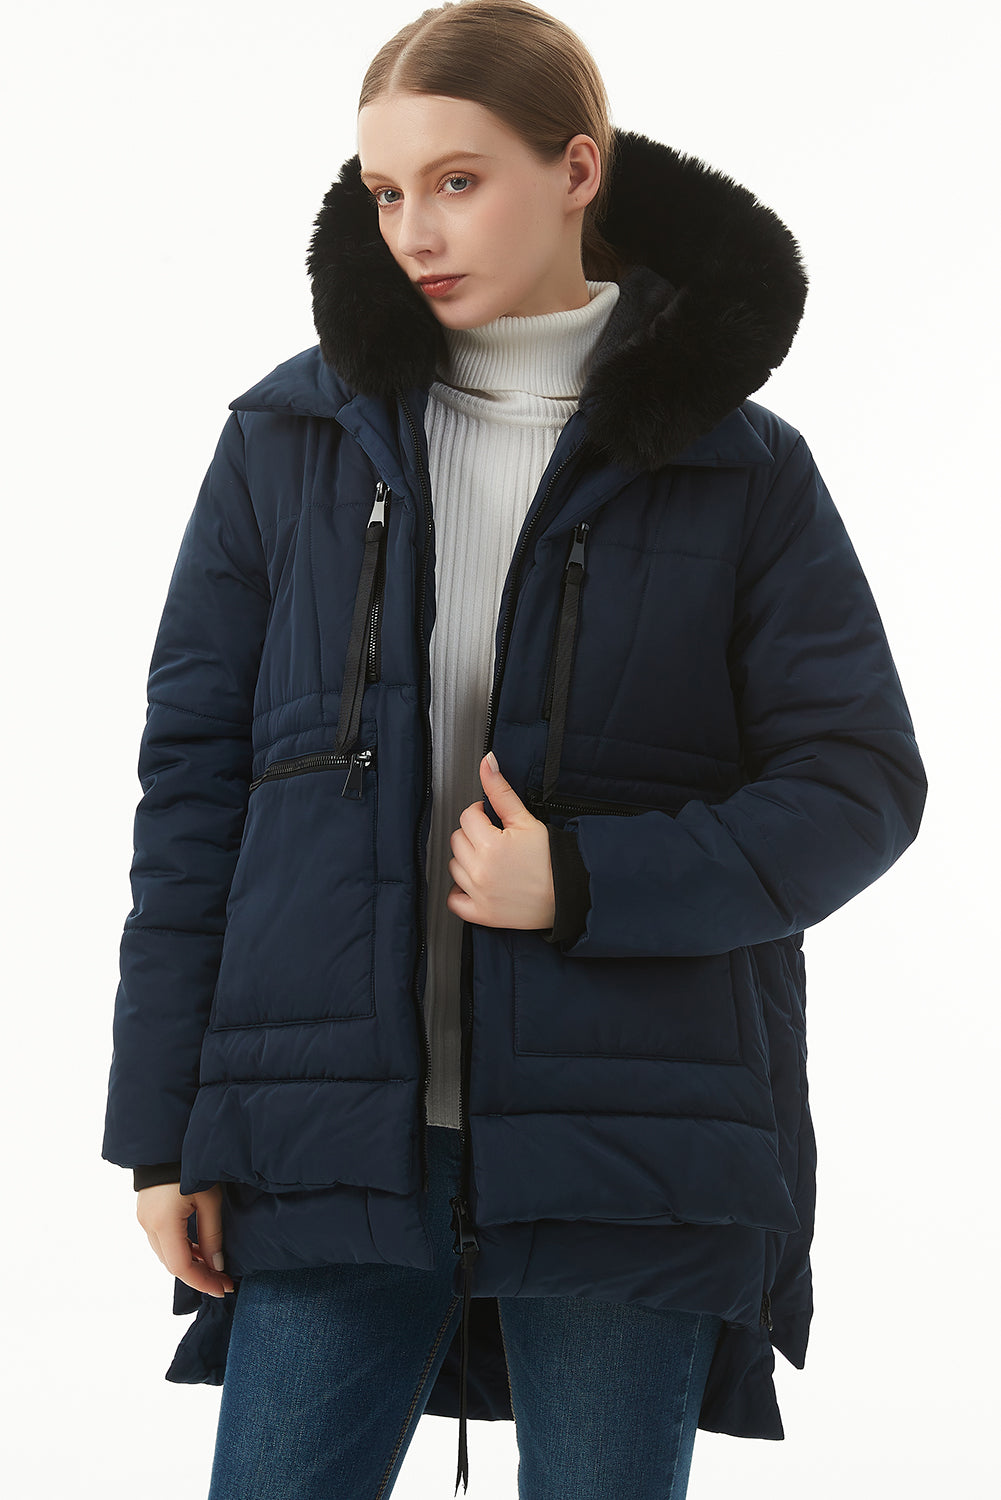 Navy Blue 100%Polyester - Wisteria Plush Linen Zip Up Hooded Puffer Coat - 7 colors - womens coat at TFC&H Co.